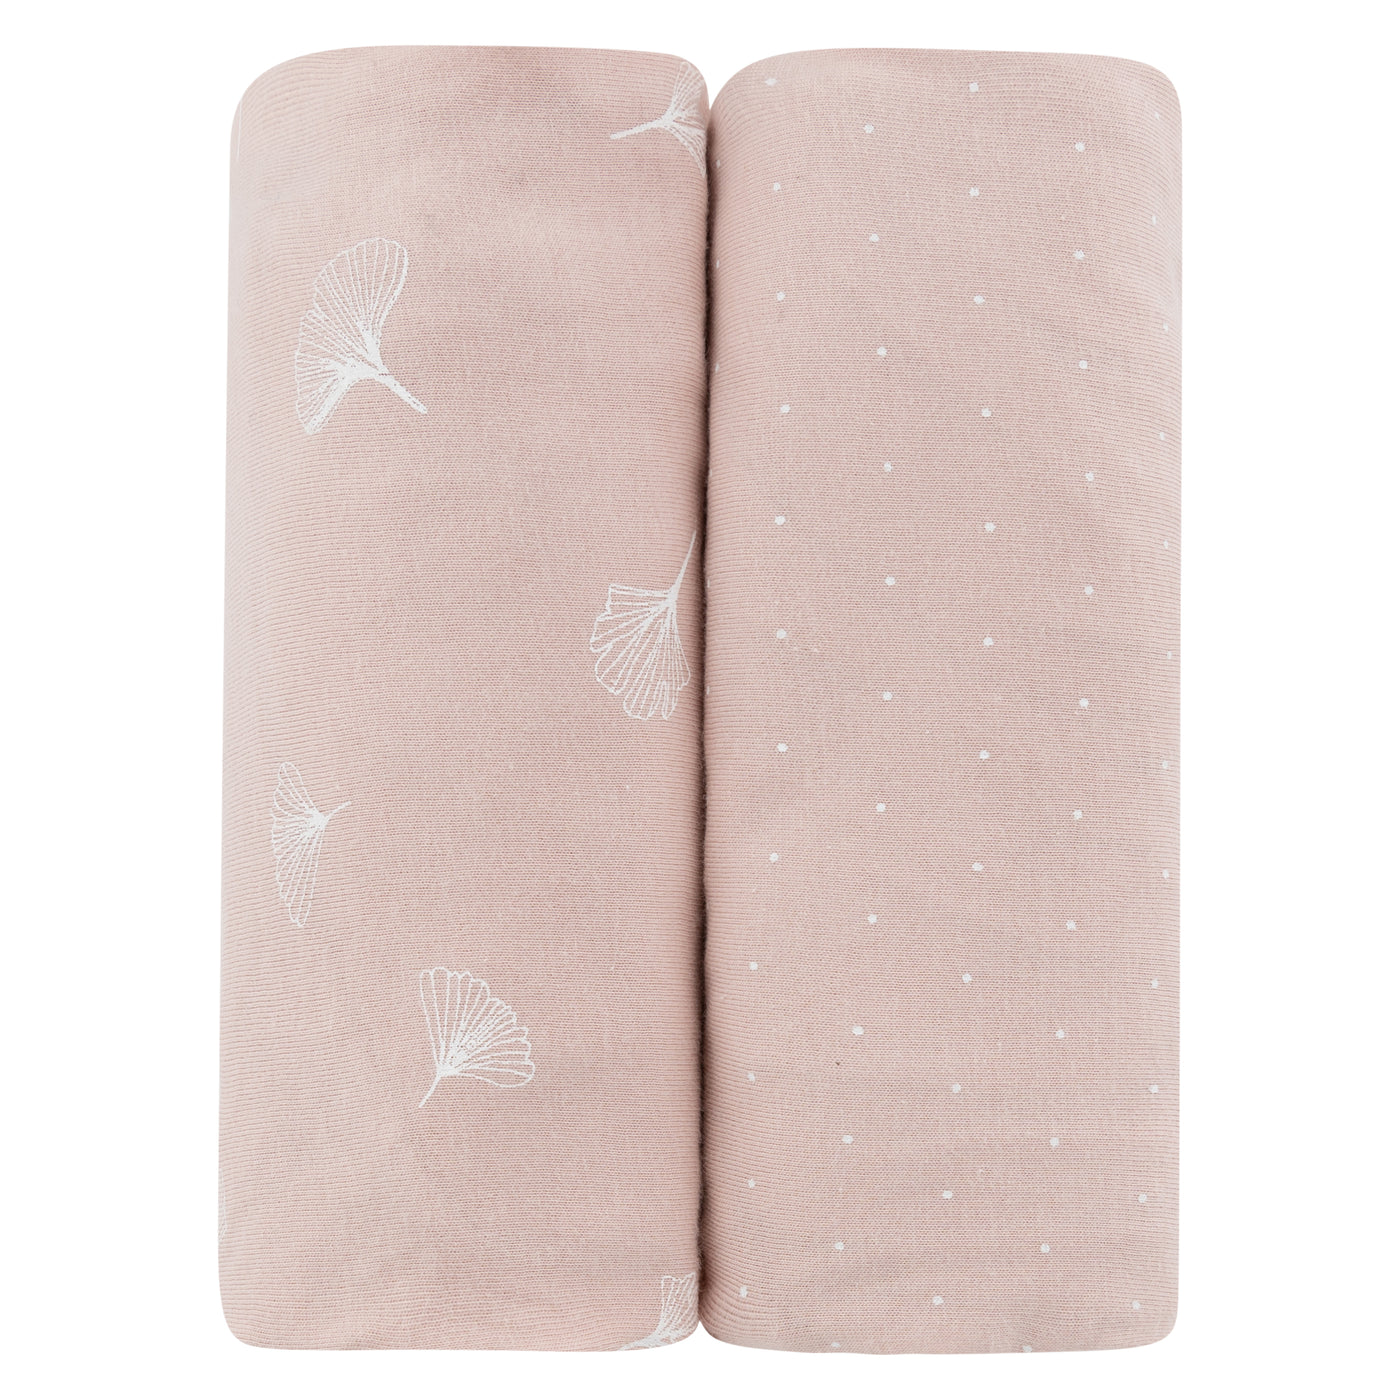 Ely's & Co. Two Pack Bassinet Sheets - Gingko Collection Pink